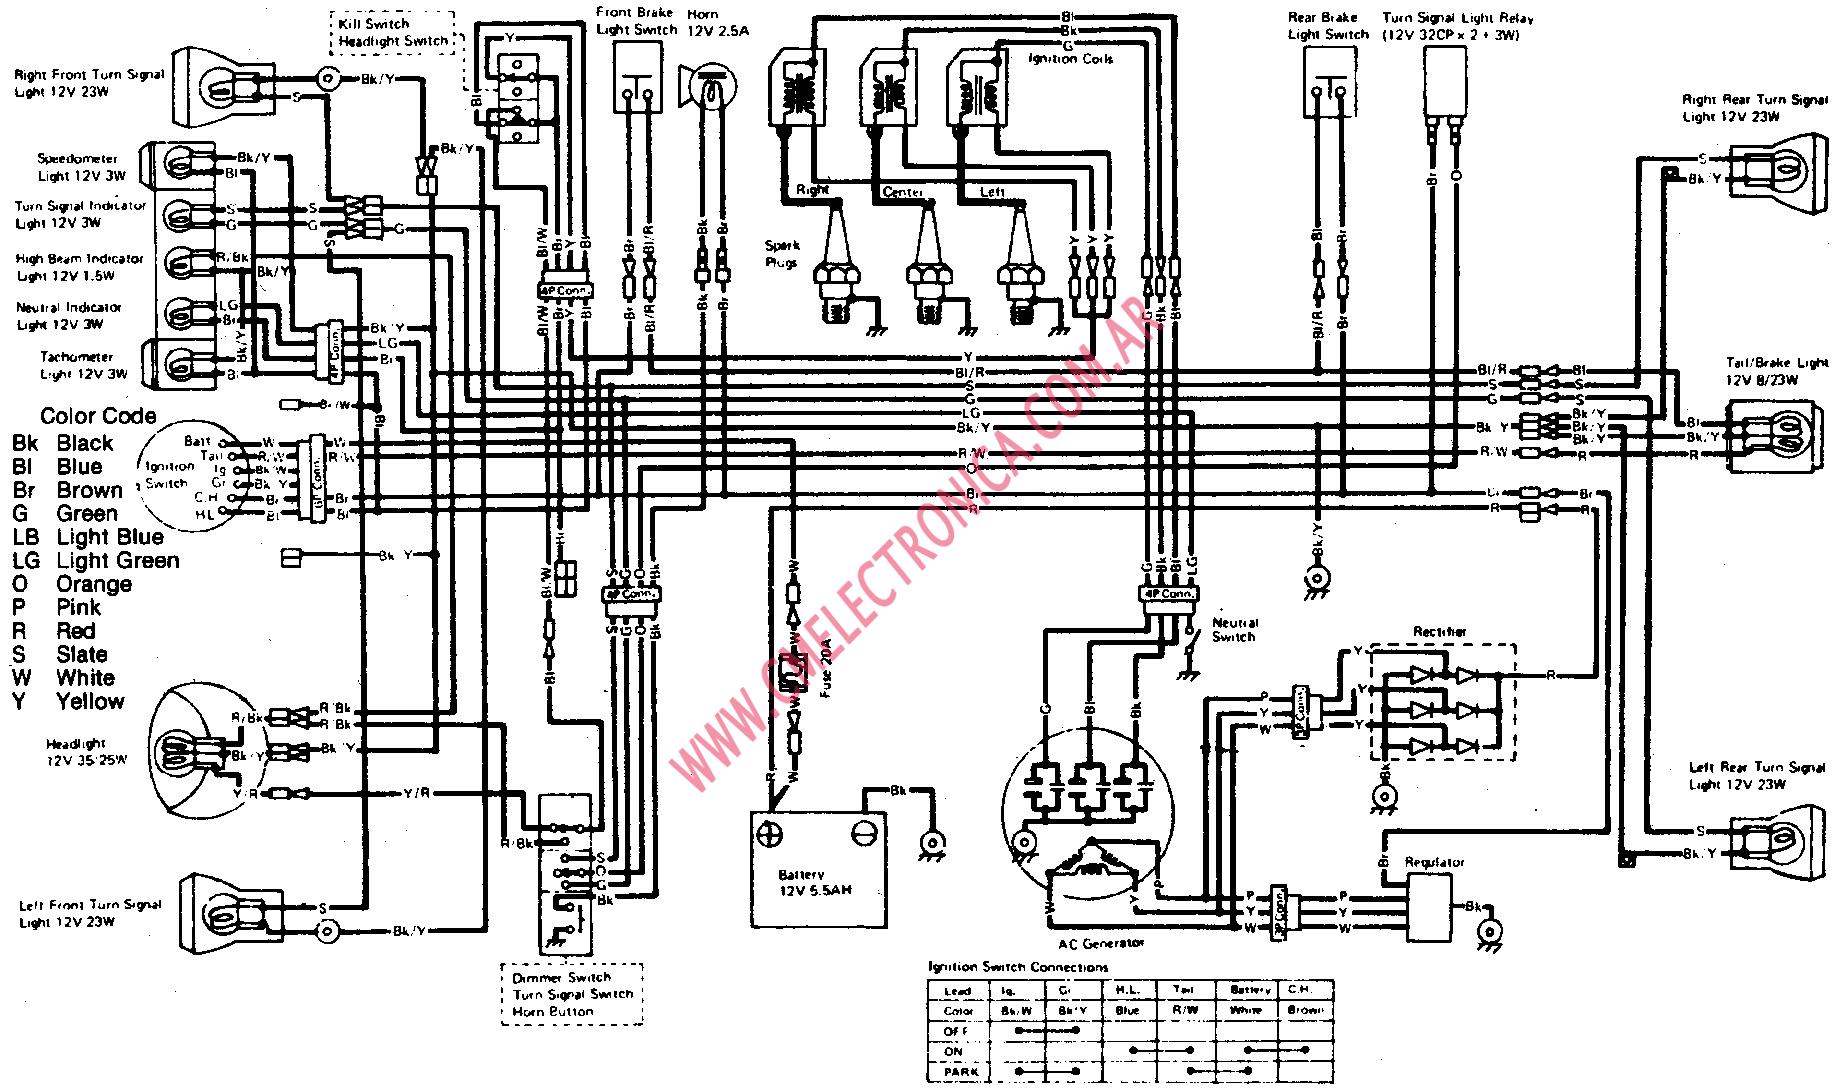 Kawasaki Brute Force 750 Wiring Diagram from www.cmelectronica.com.ar